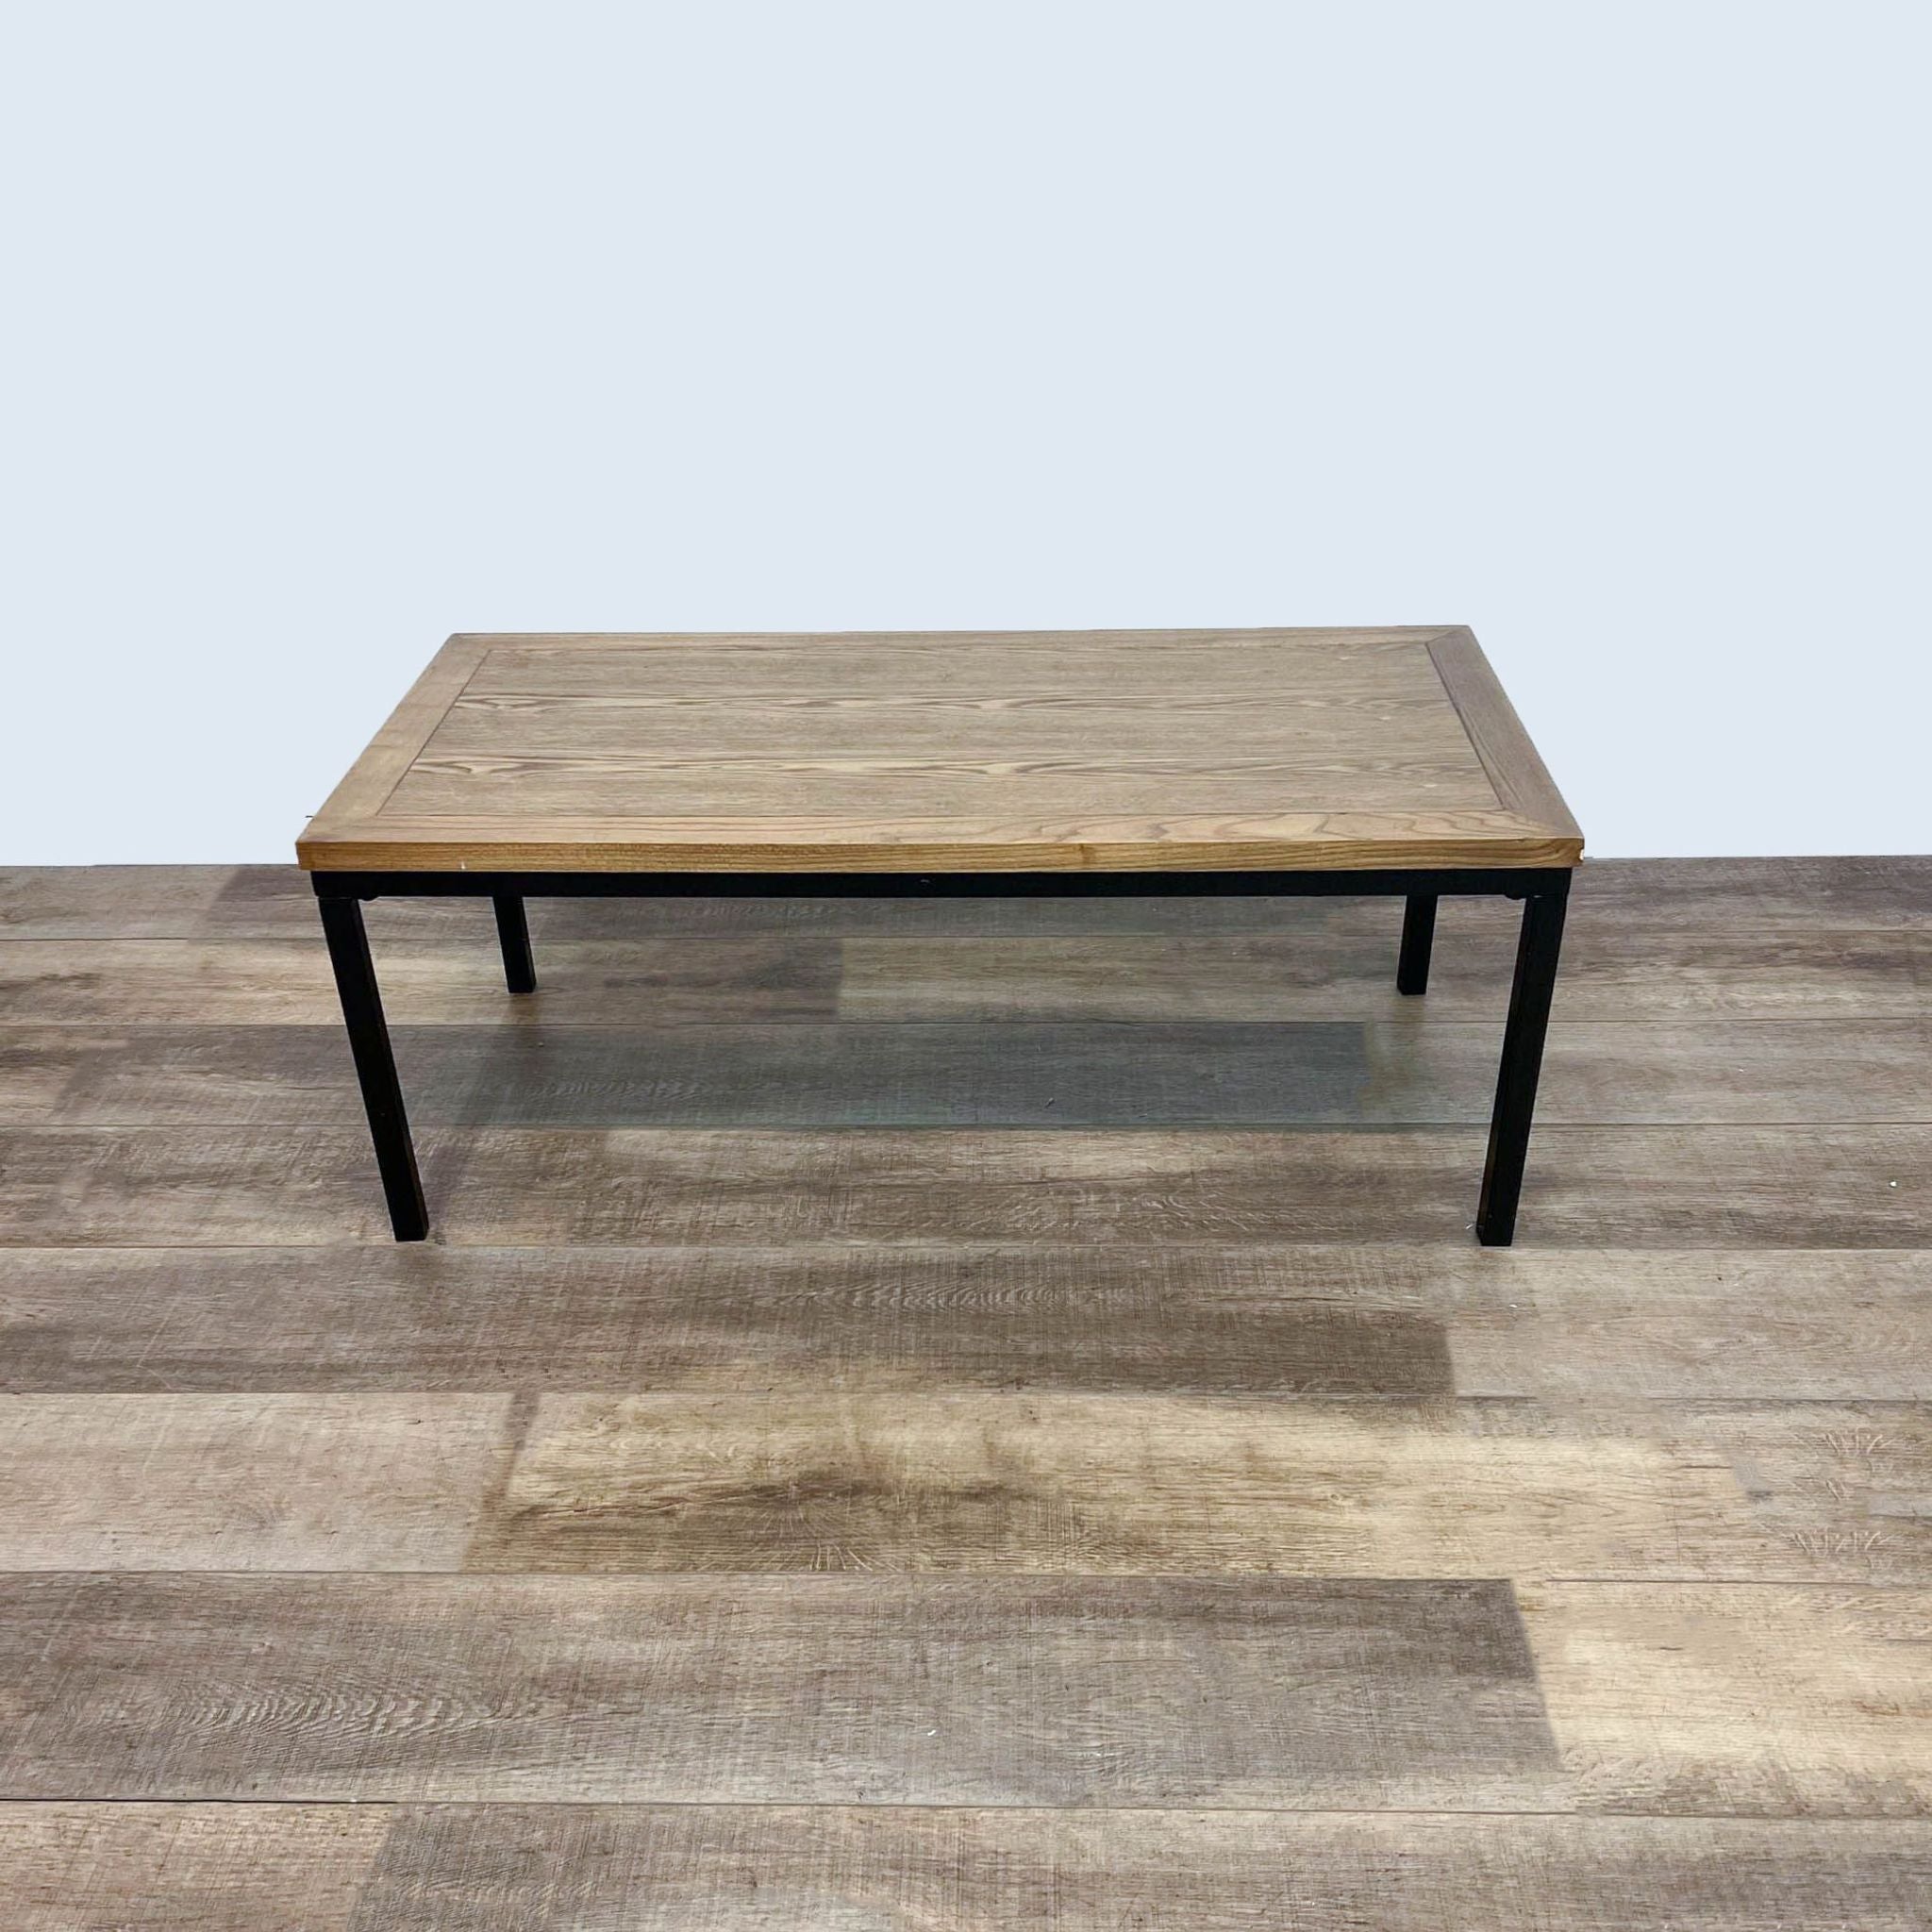 Reperch brand coffee table with a natural wood top and black metal legs on a wooden floor.